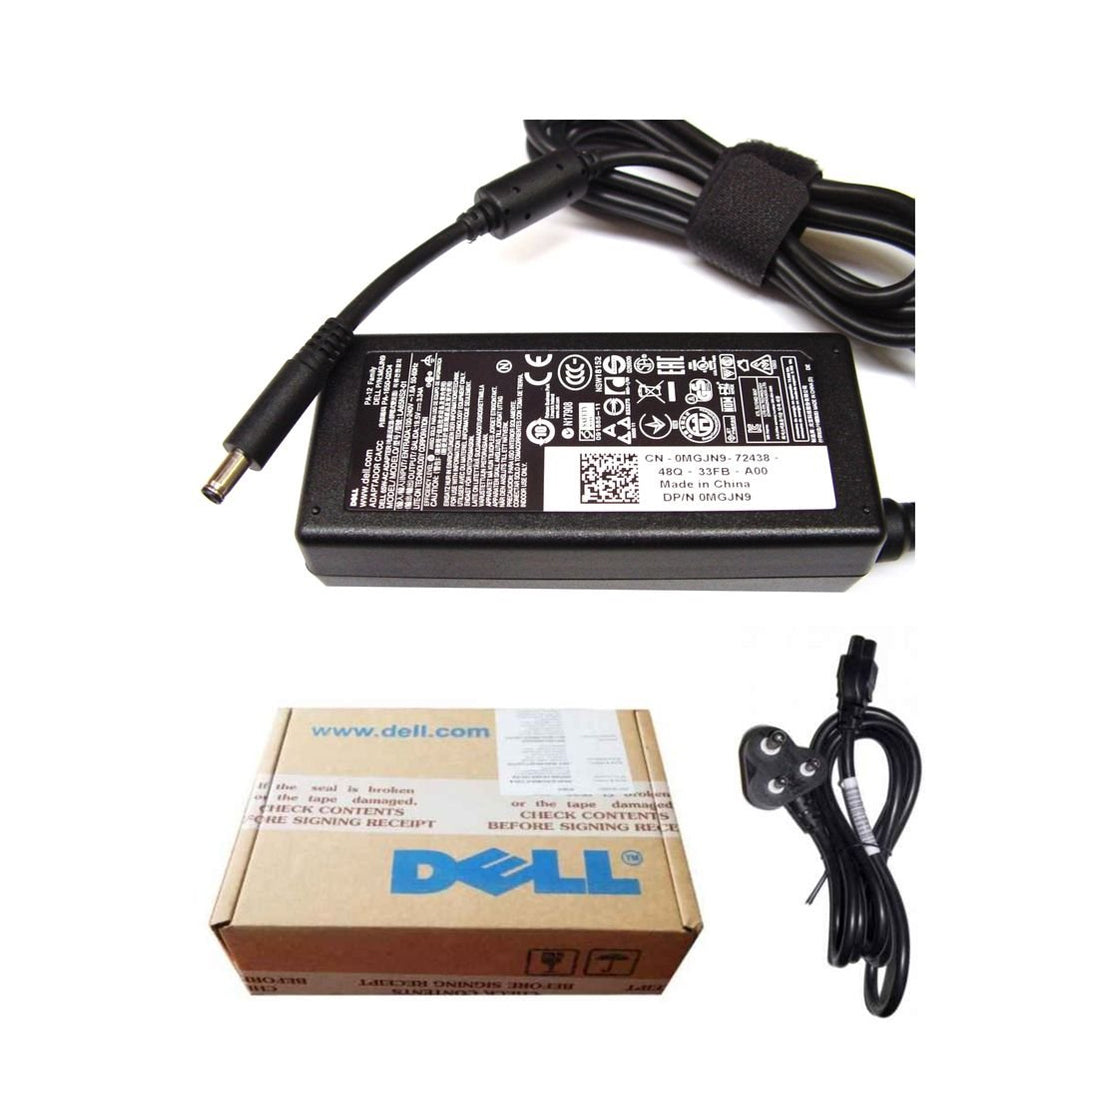 Dell Original 65W 19.5V 4.5mm Pin Laptop Charger Adapter for Vostro 14 3478 With Power Cord